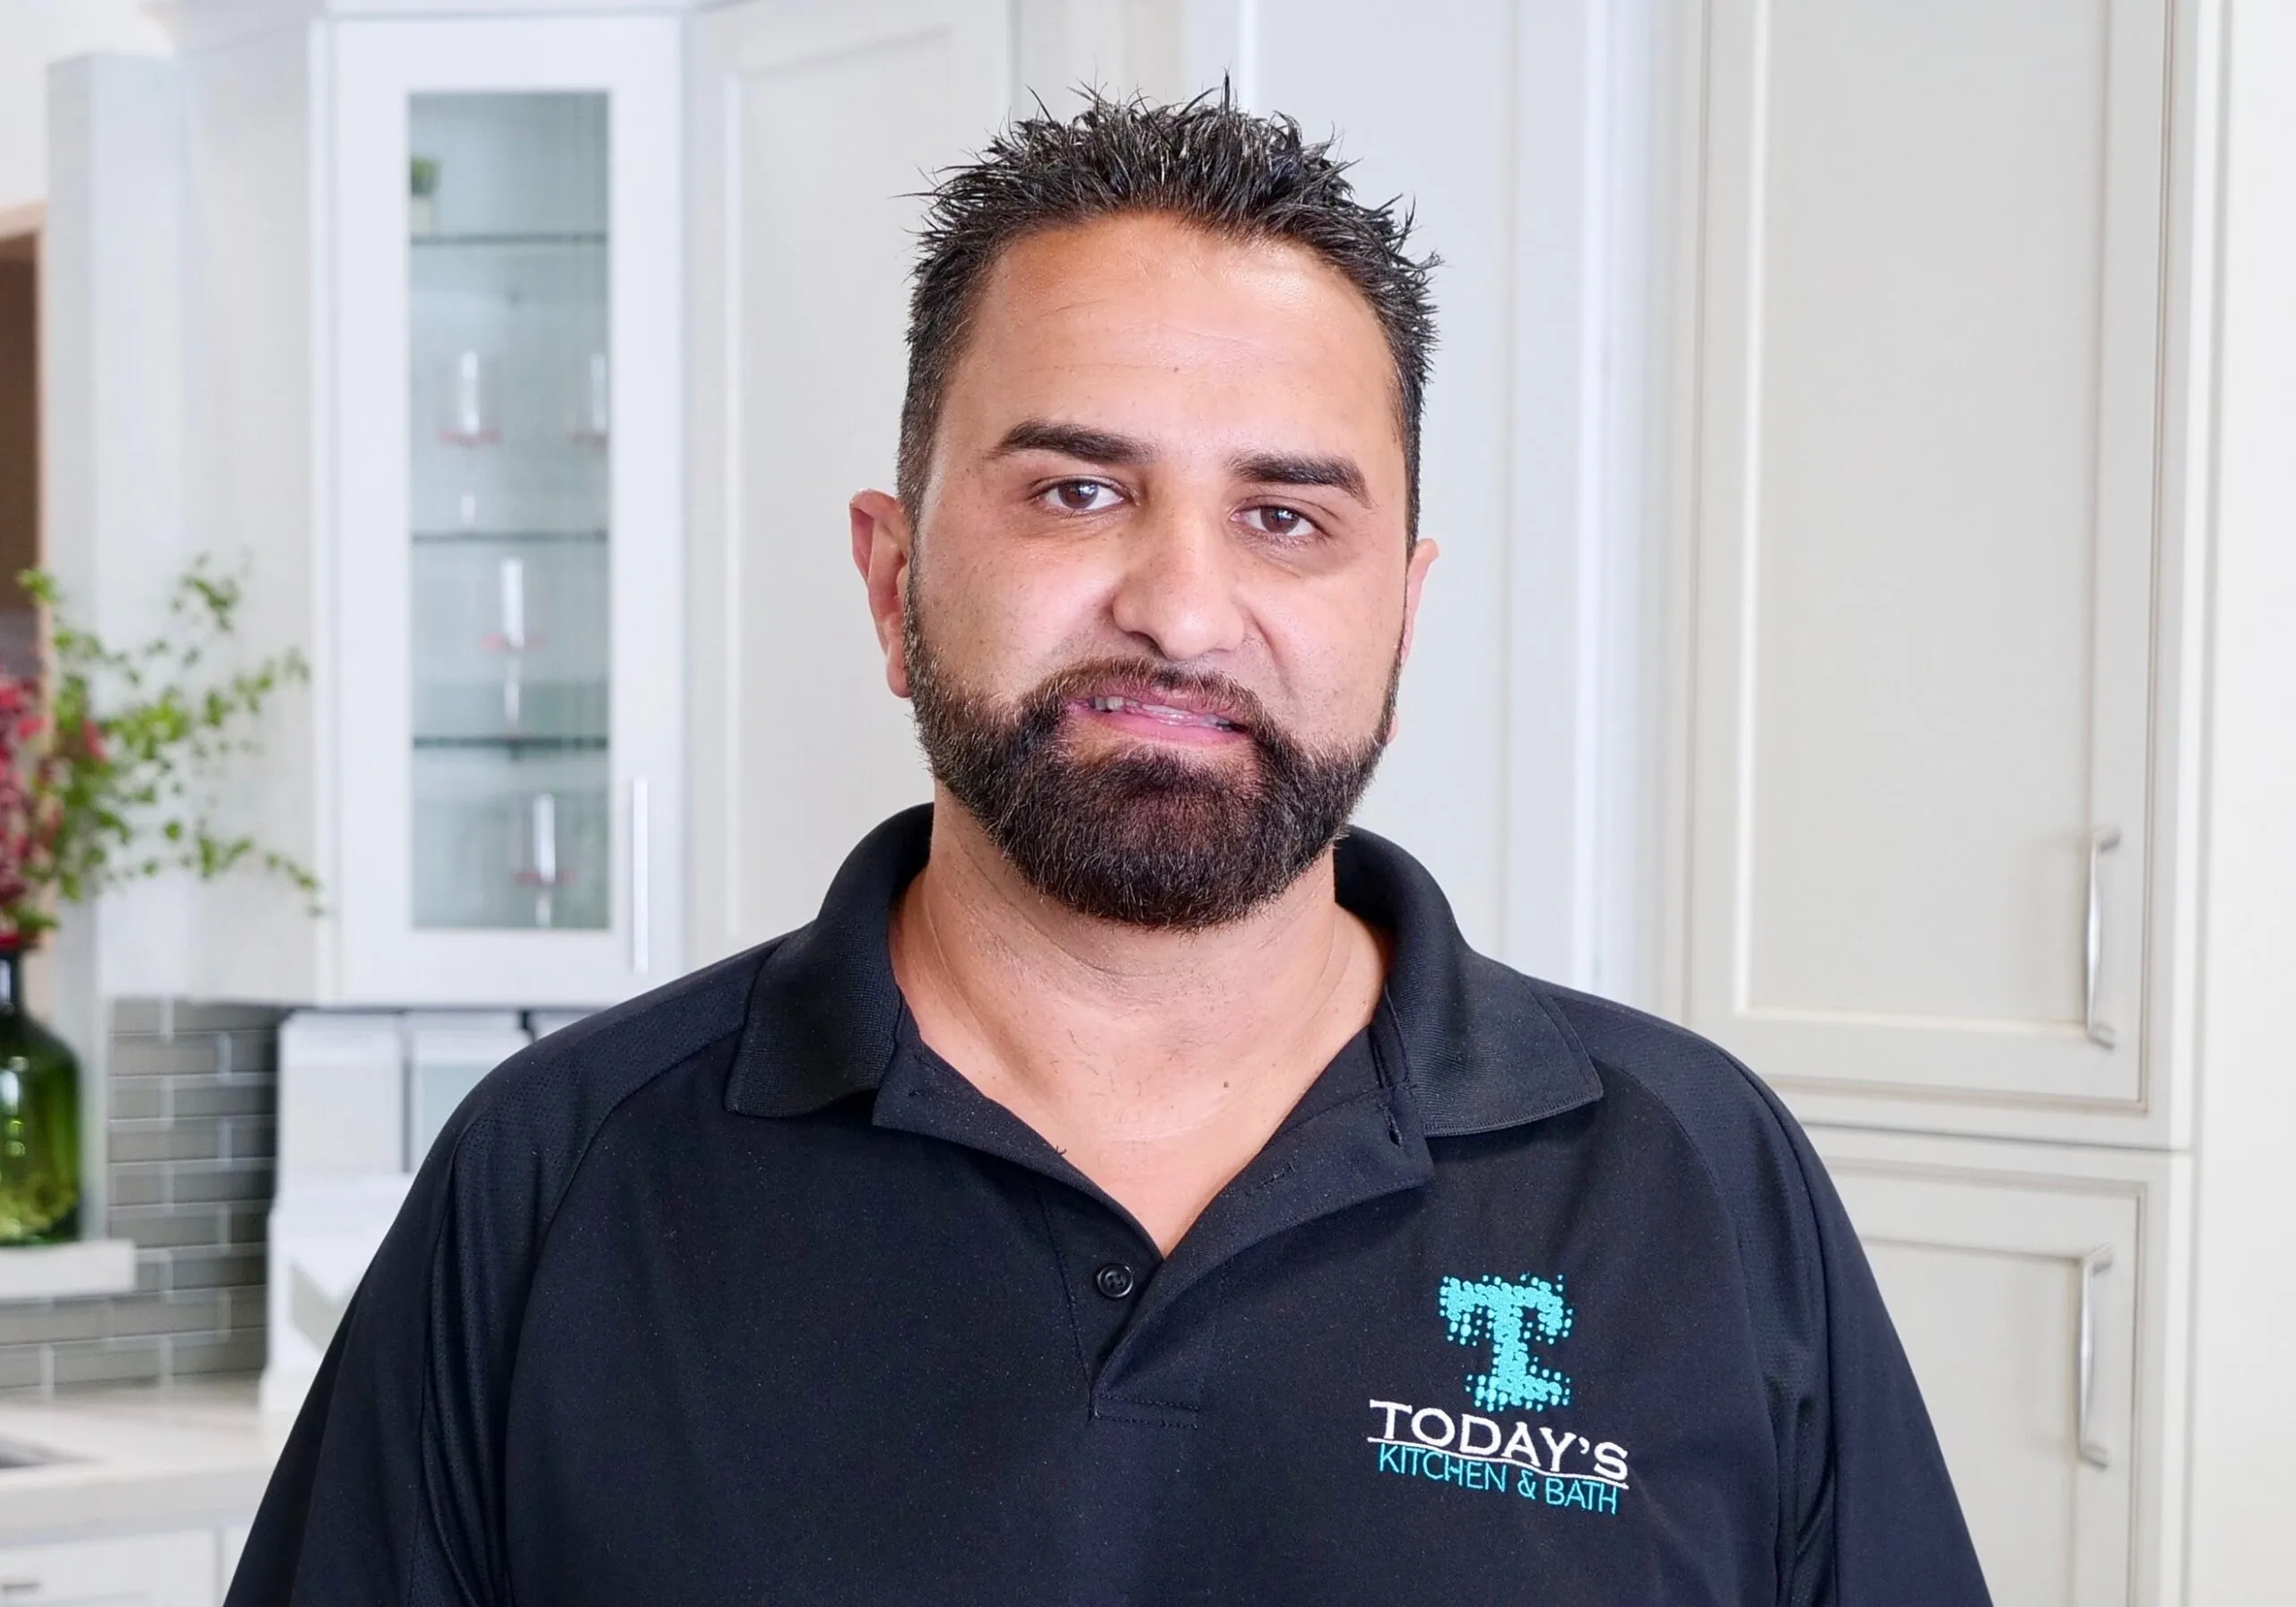 Eric Aslami is owner of Today’s Kitchen &amp; Bath, a Diamond Certified company. He can be reached at (510) 397-8965 or by email.